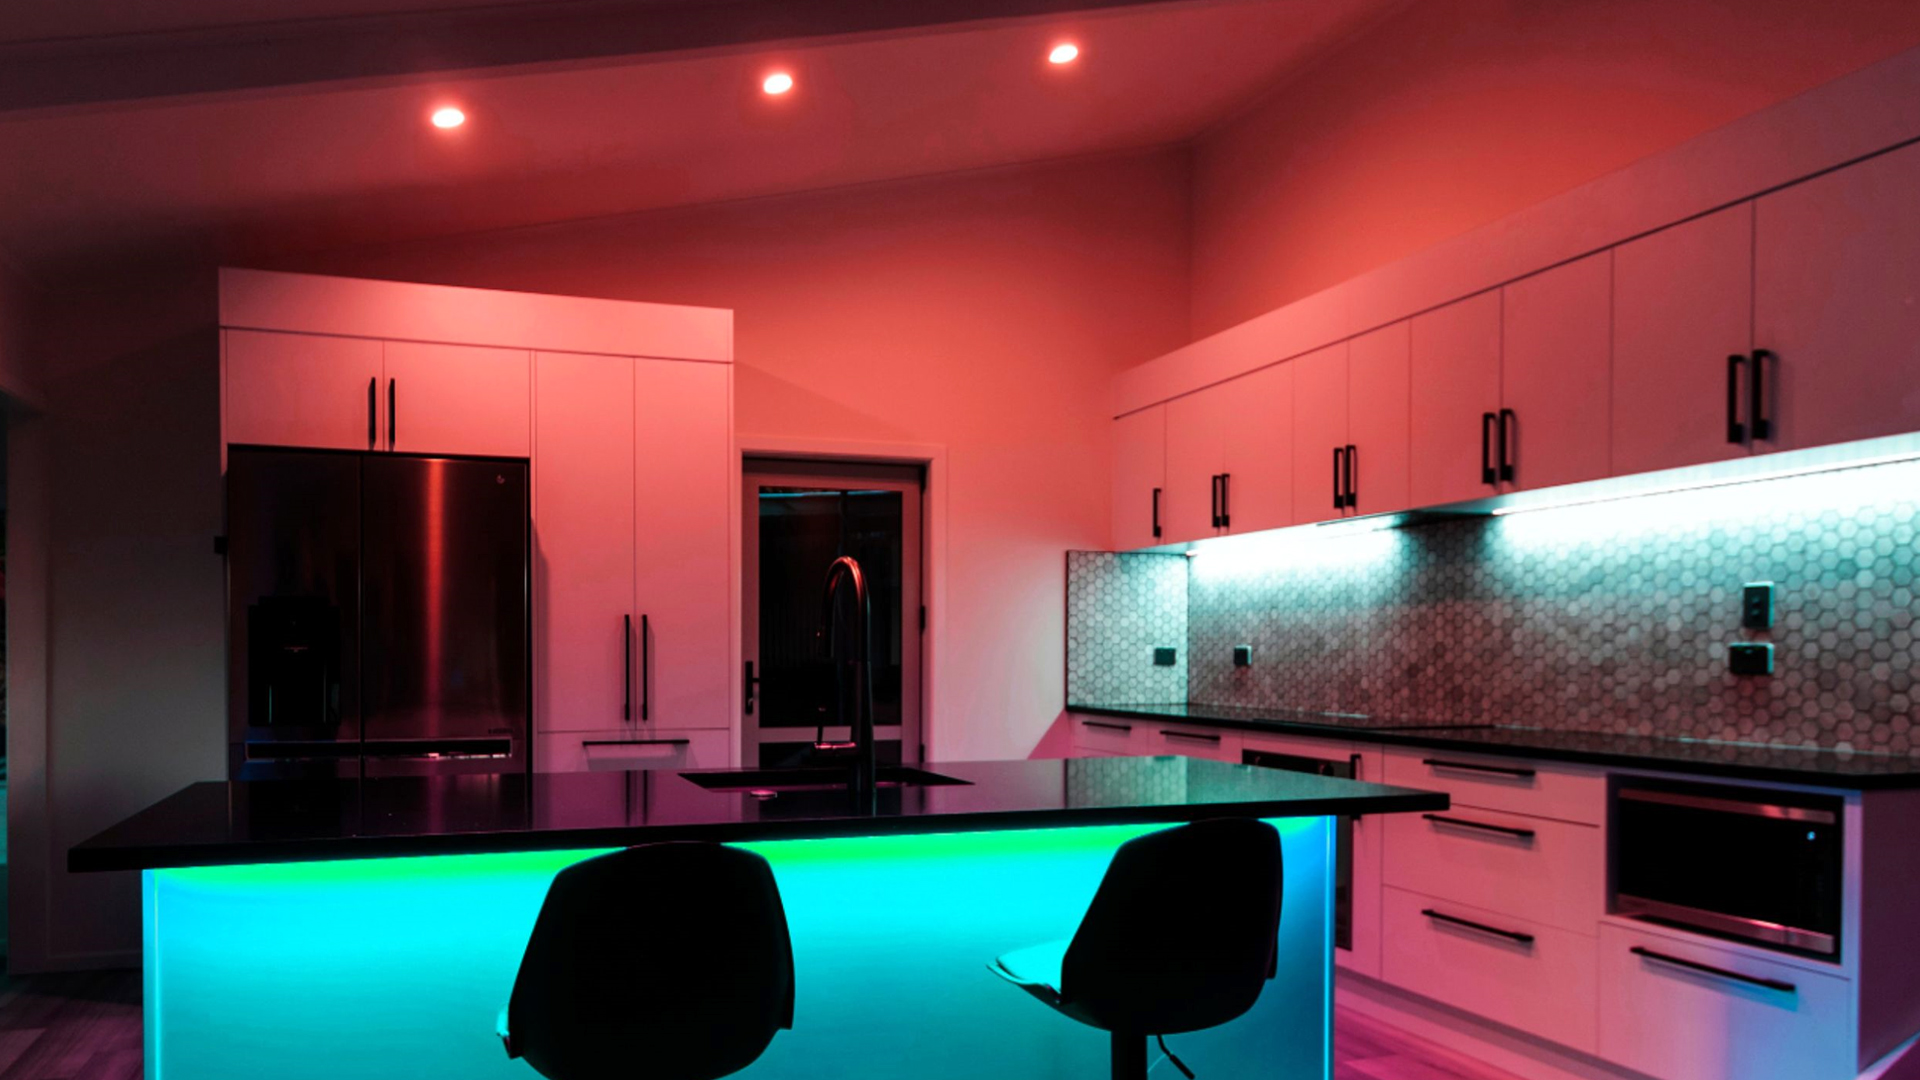 A kitchen lit with LIFX Smart Bulbs and Lightstrips